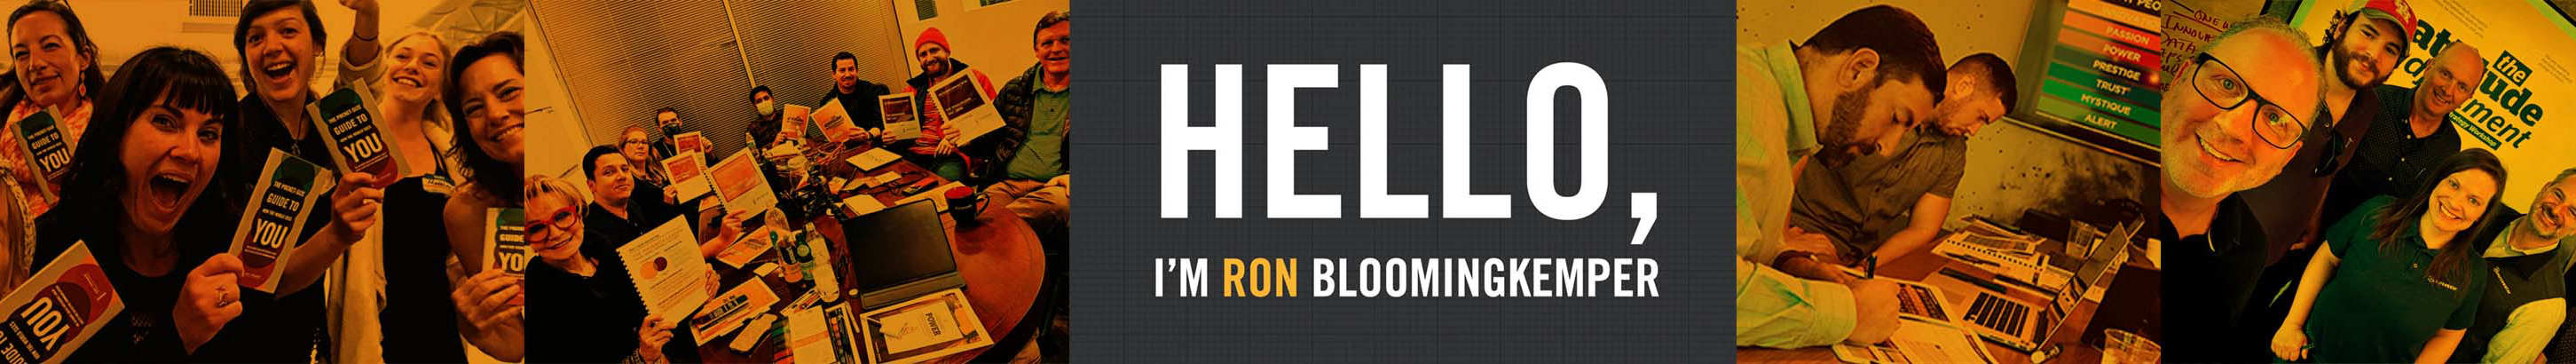 Ron Bloomingkemper's profile banner